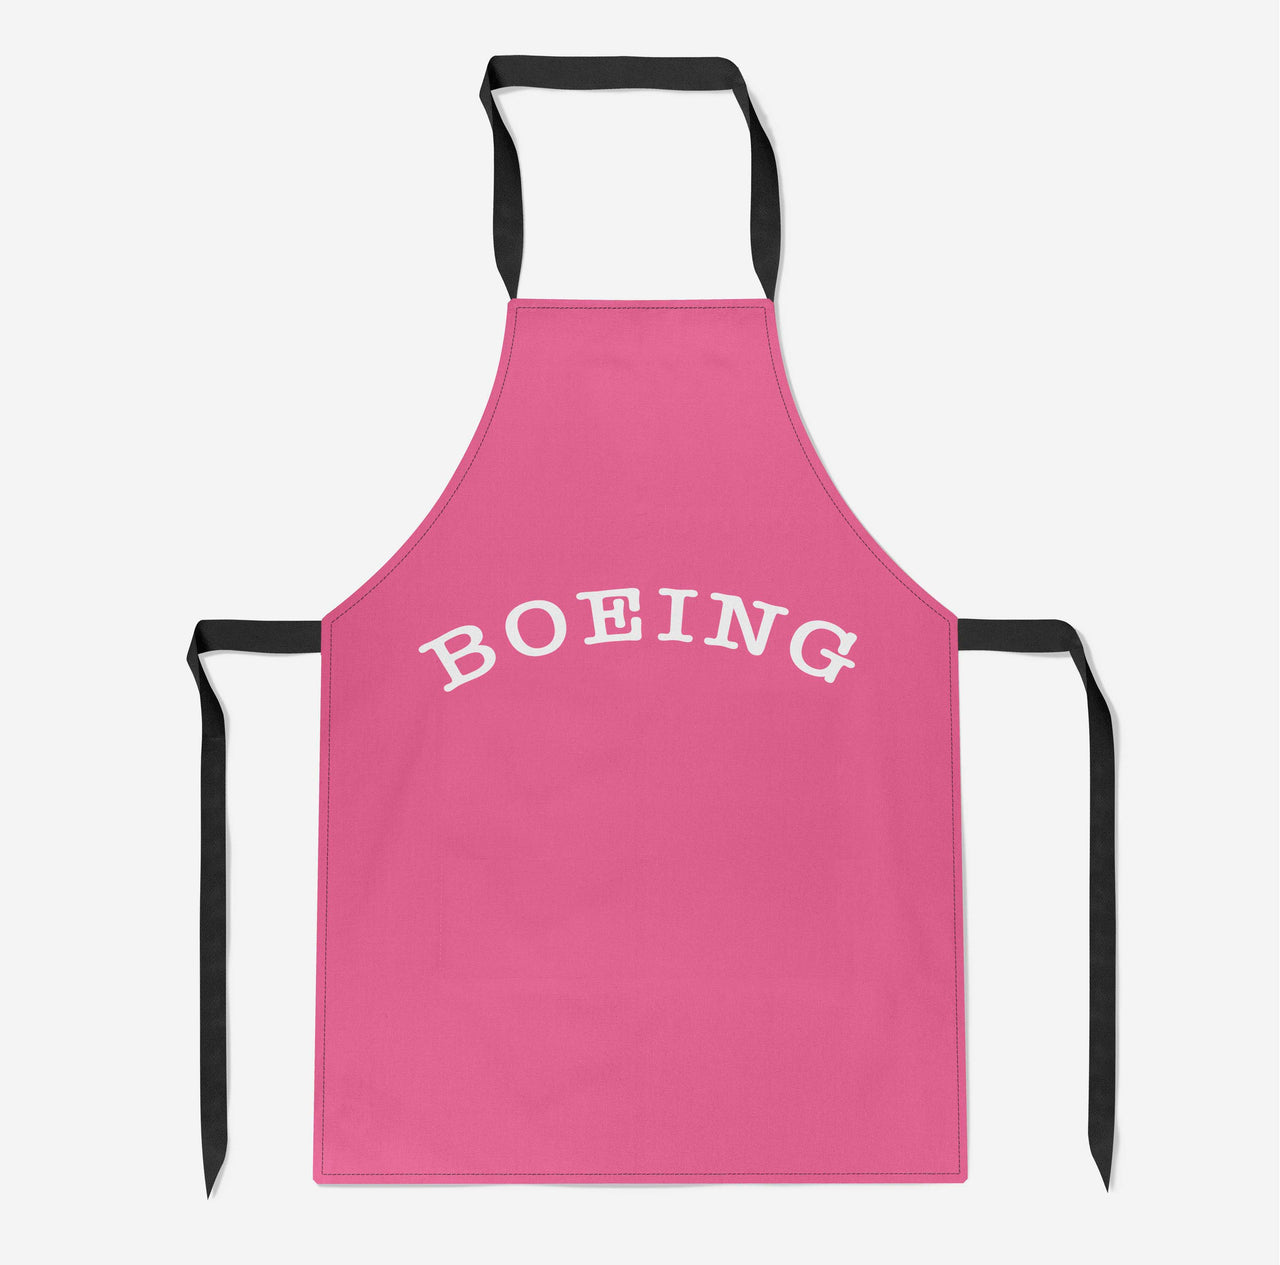 Special BOEING Text Designed Kitchen Aprons